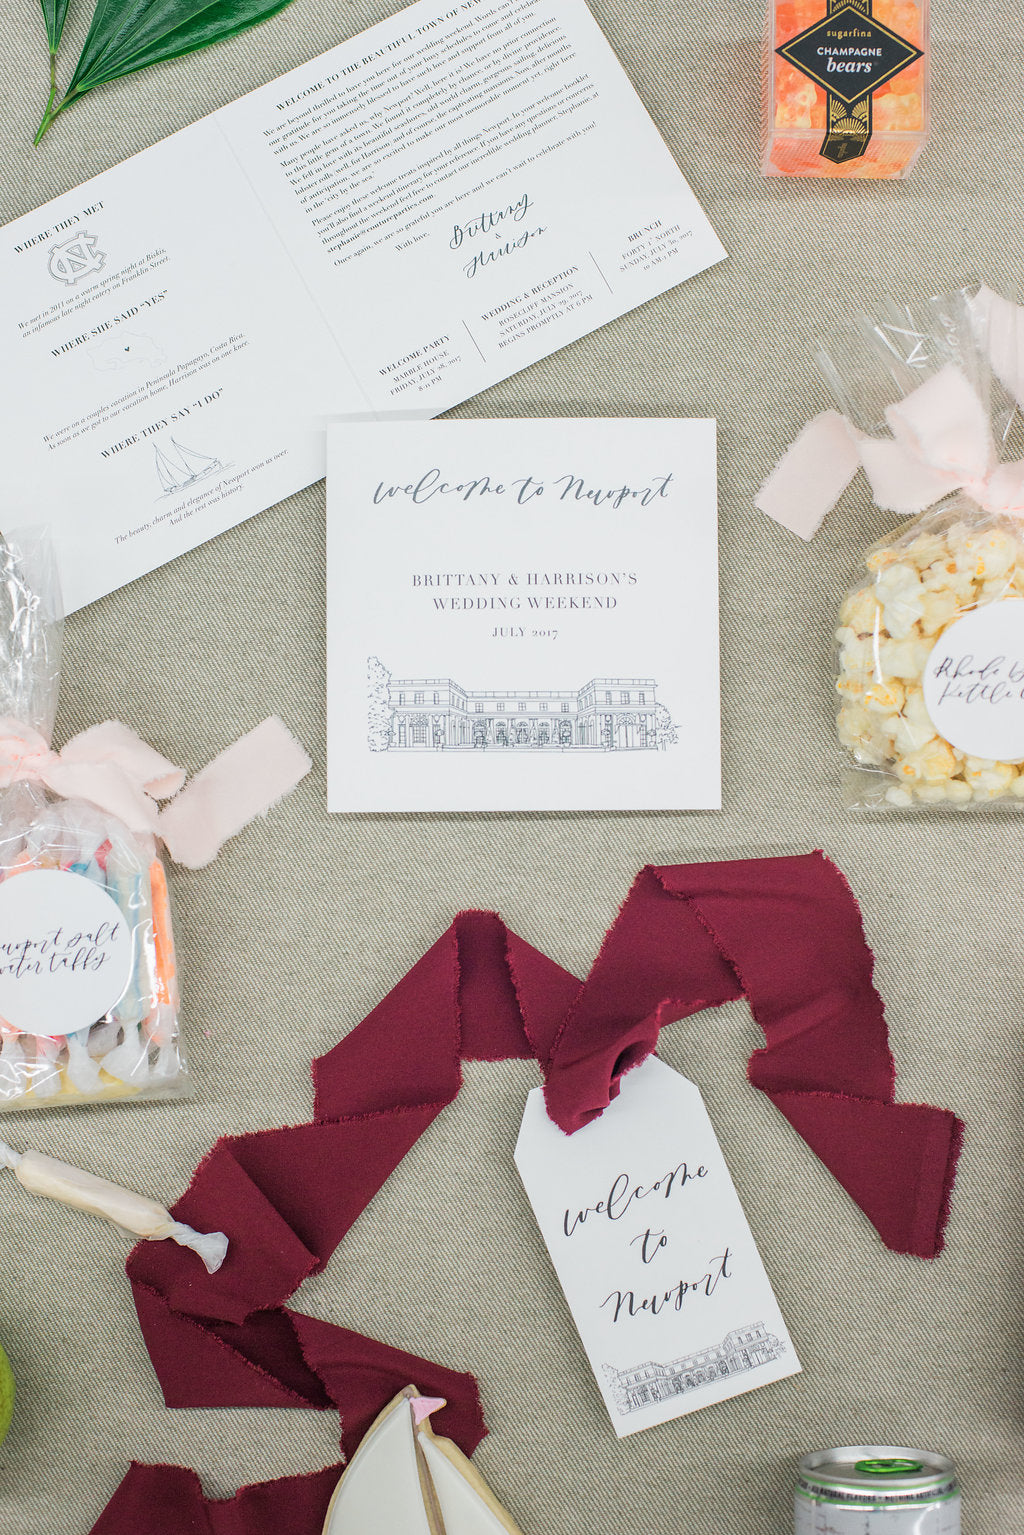 Custom welcome letter for wedding welcome gifts